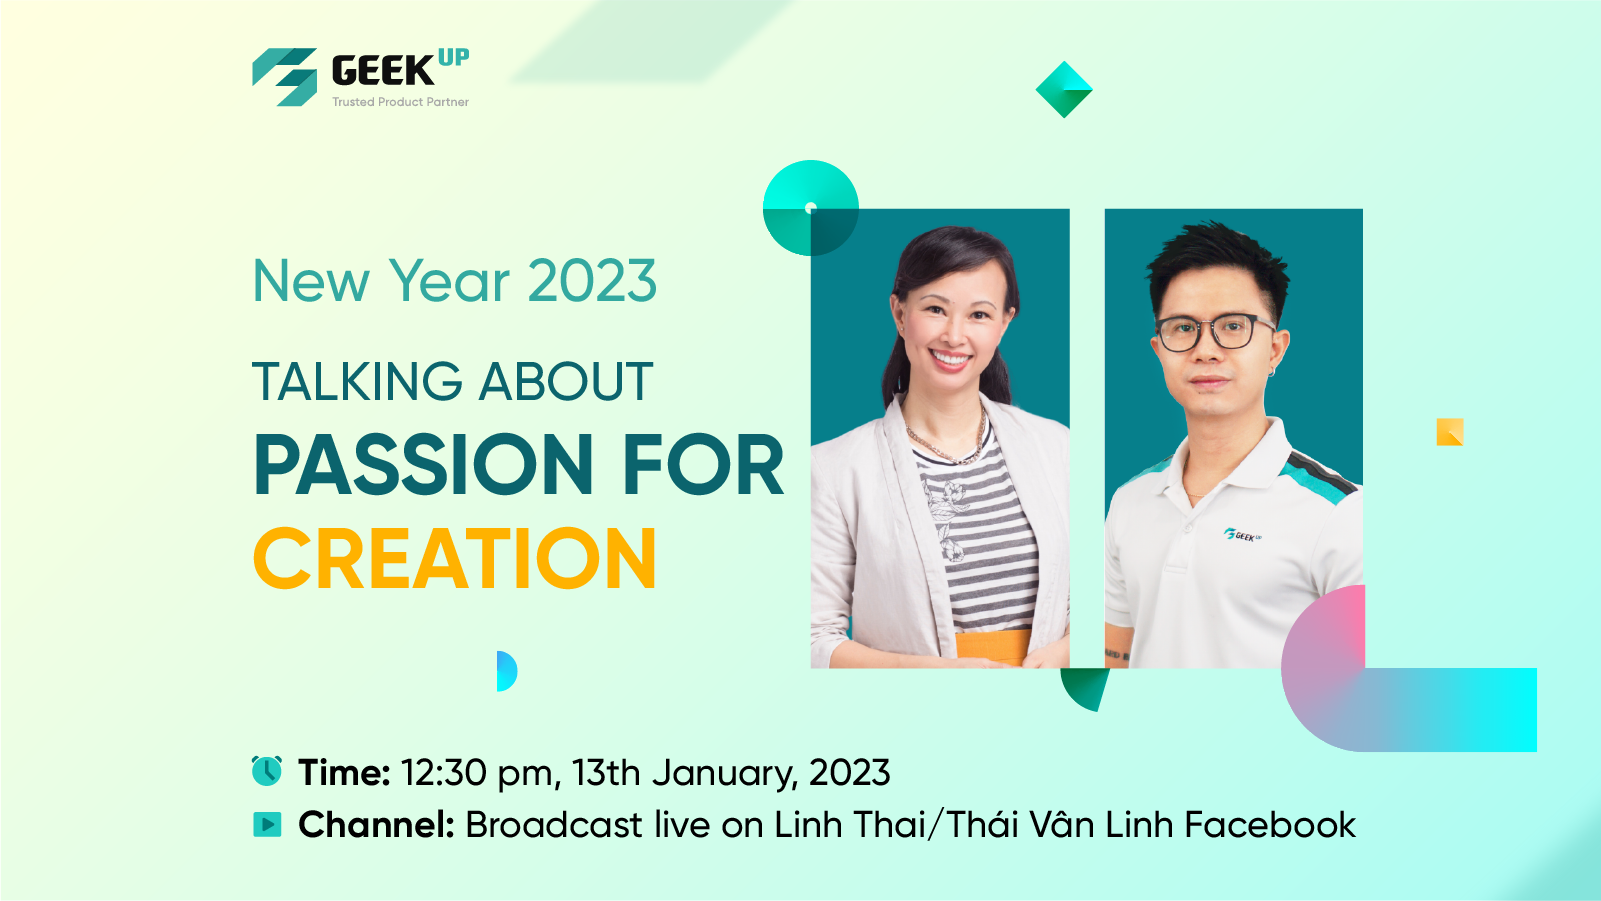 Shark Thai Van Linh and GEEK Up expert shared about creative passion